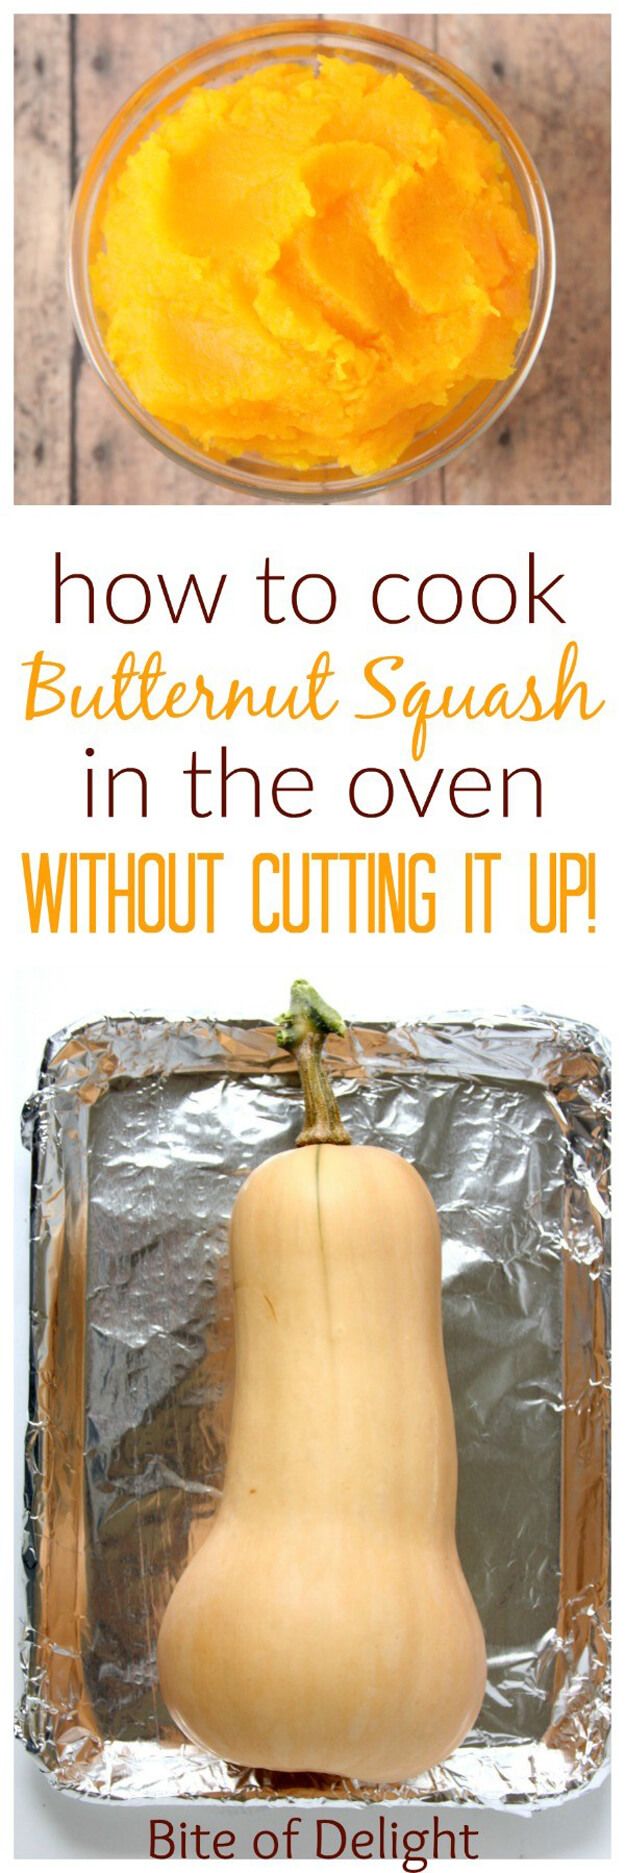 Cook Butternut Squash Without Cutting It